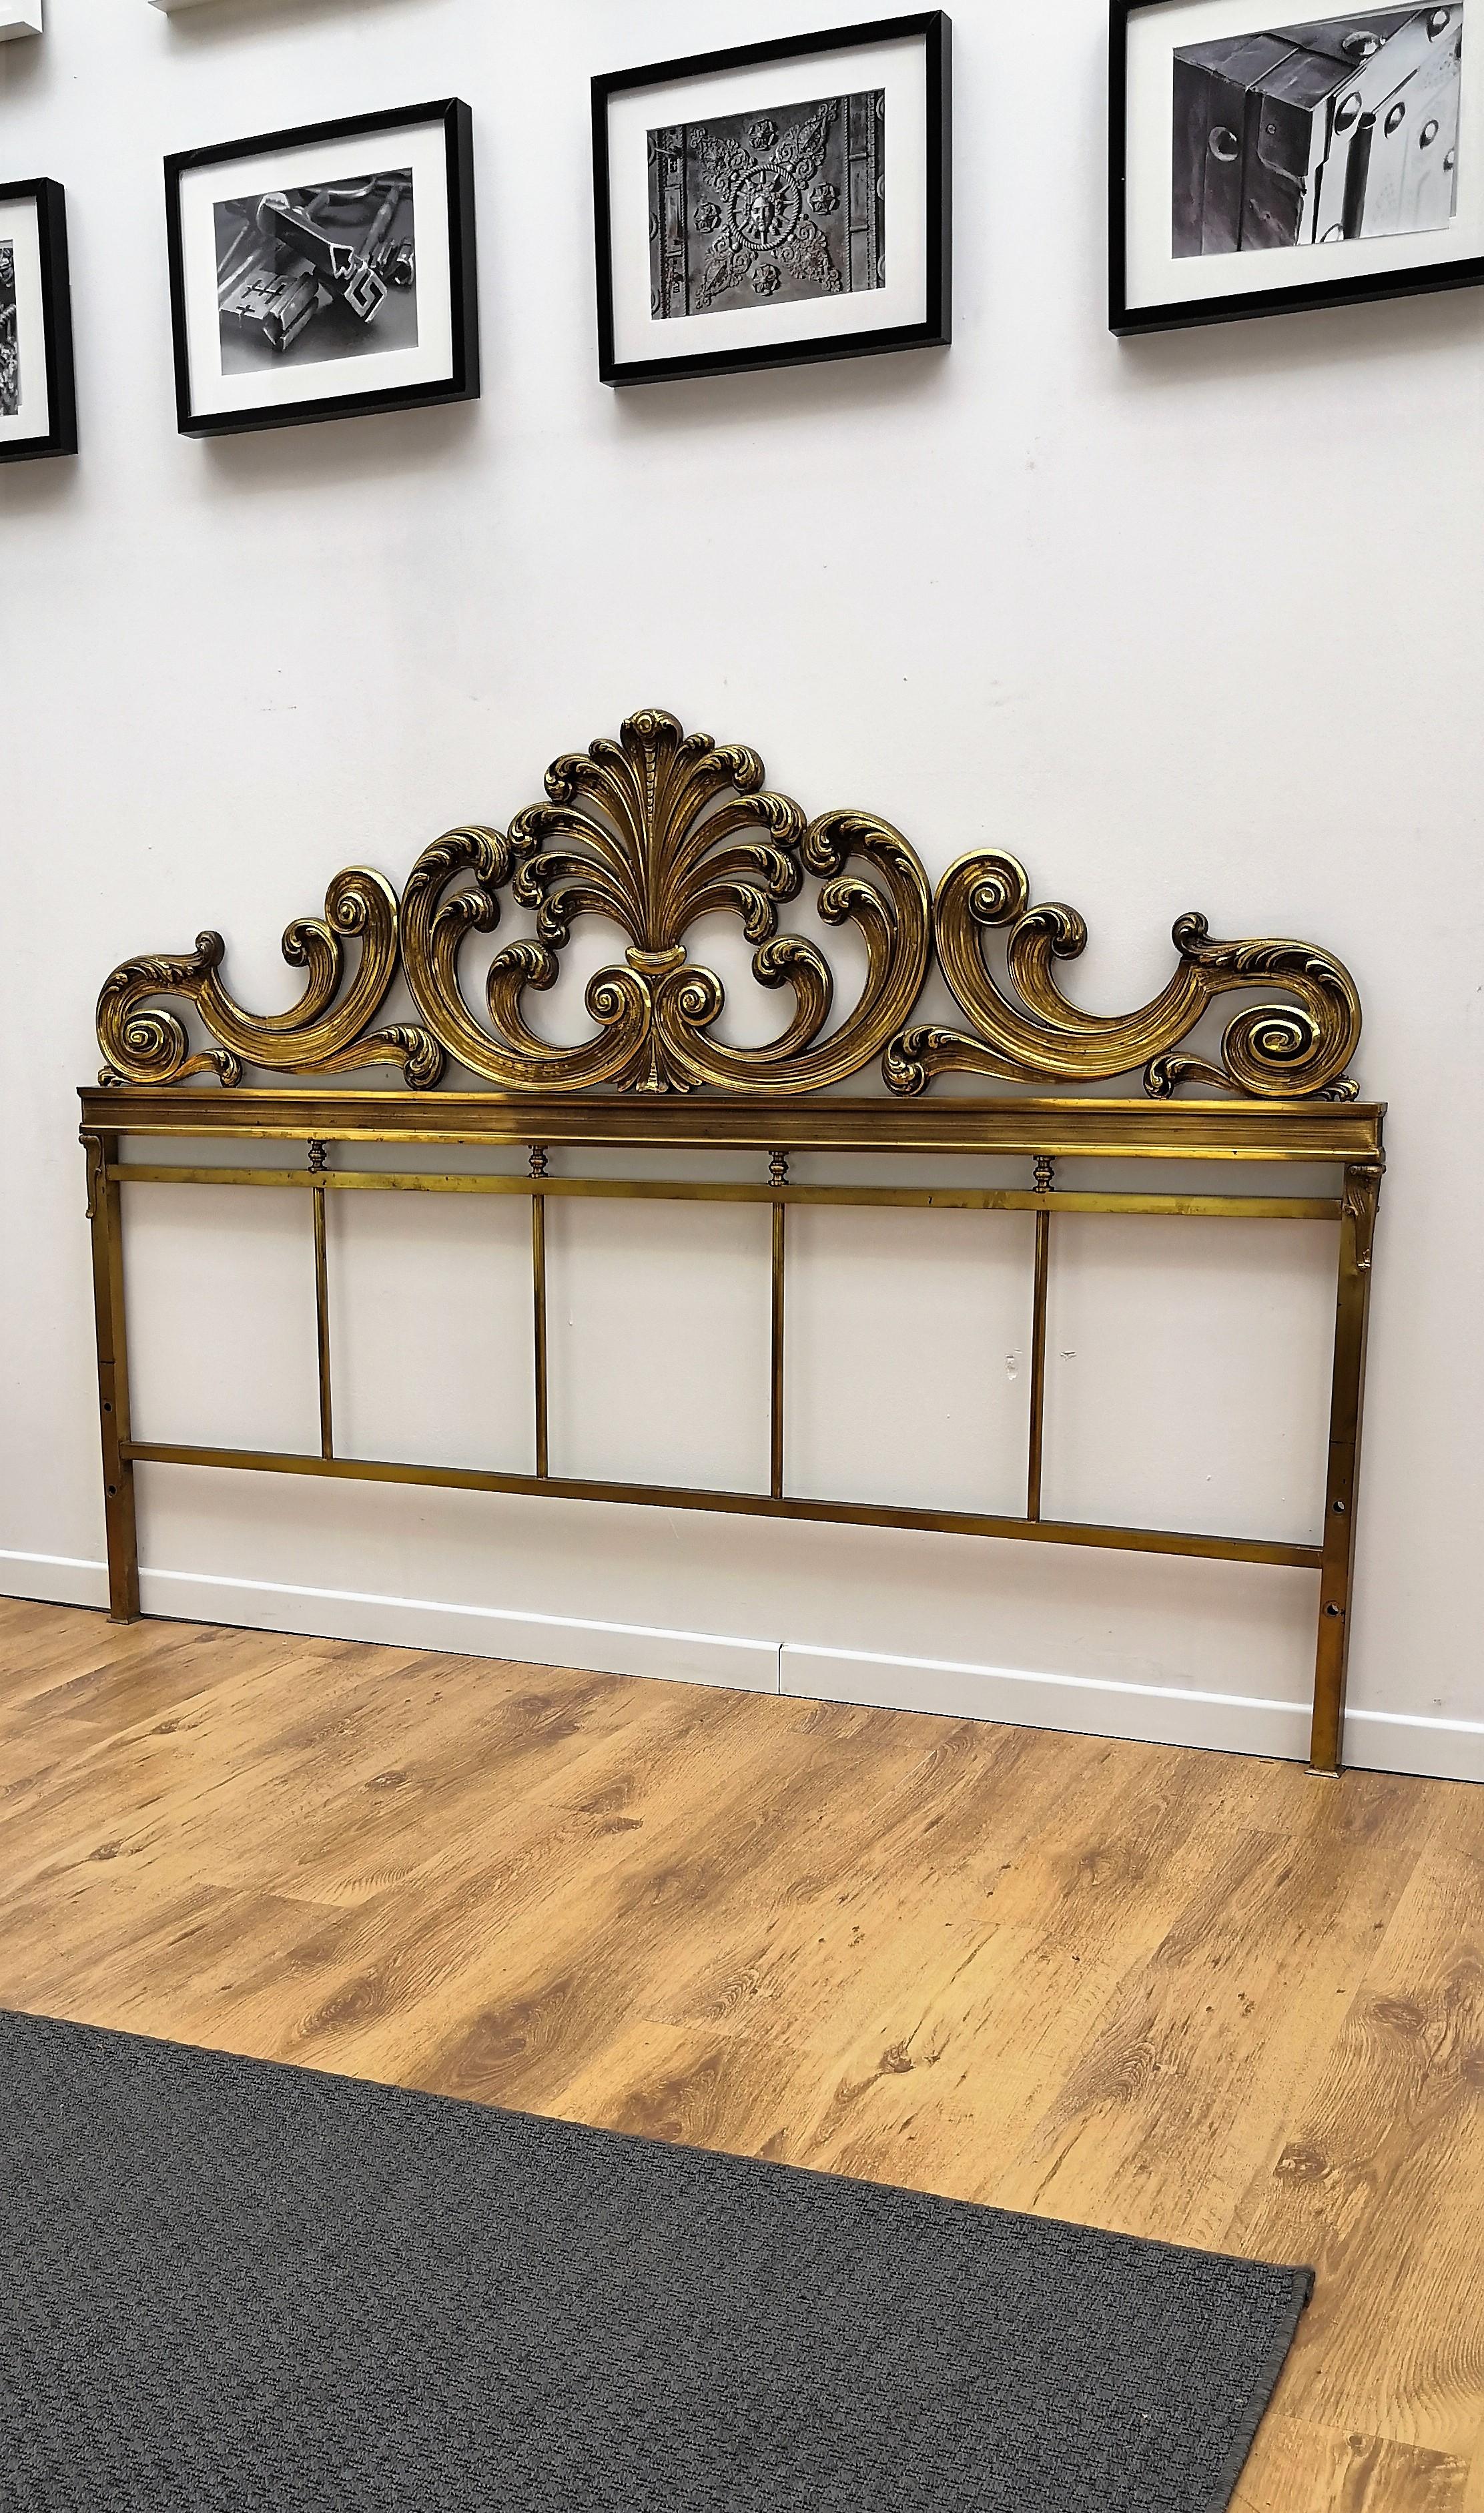 Beautiful and stylish Italian Baroque neoclassical shiny brass bed headboard frame dated around the 1950s. A great piece that perfectly adds to every home decor the typical glitz, glamour, and gold of Hollywood Regency style, with a nod to Art Deco